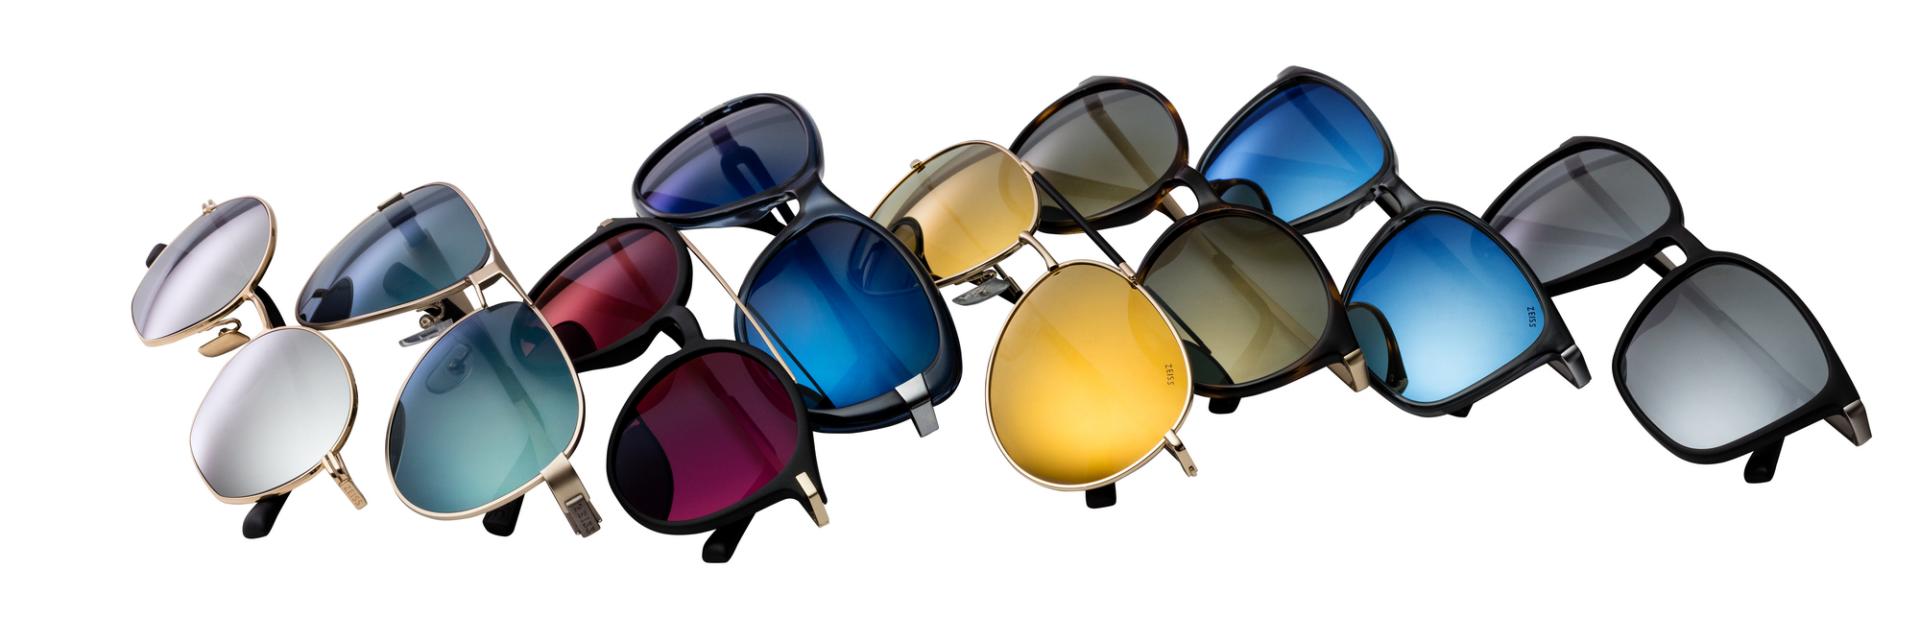 Eight sunglasses with different frames. The lenses have different mirror coatings that make them fashionable.